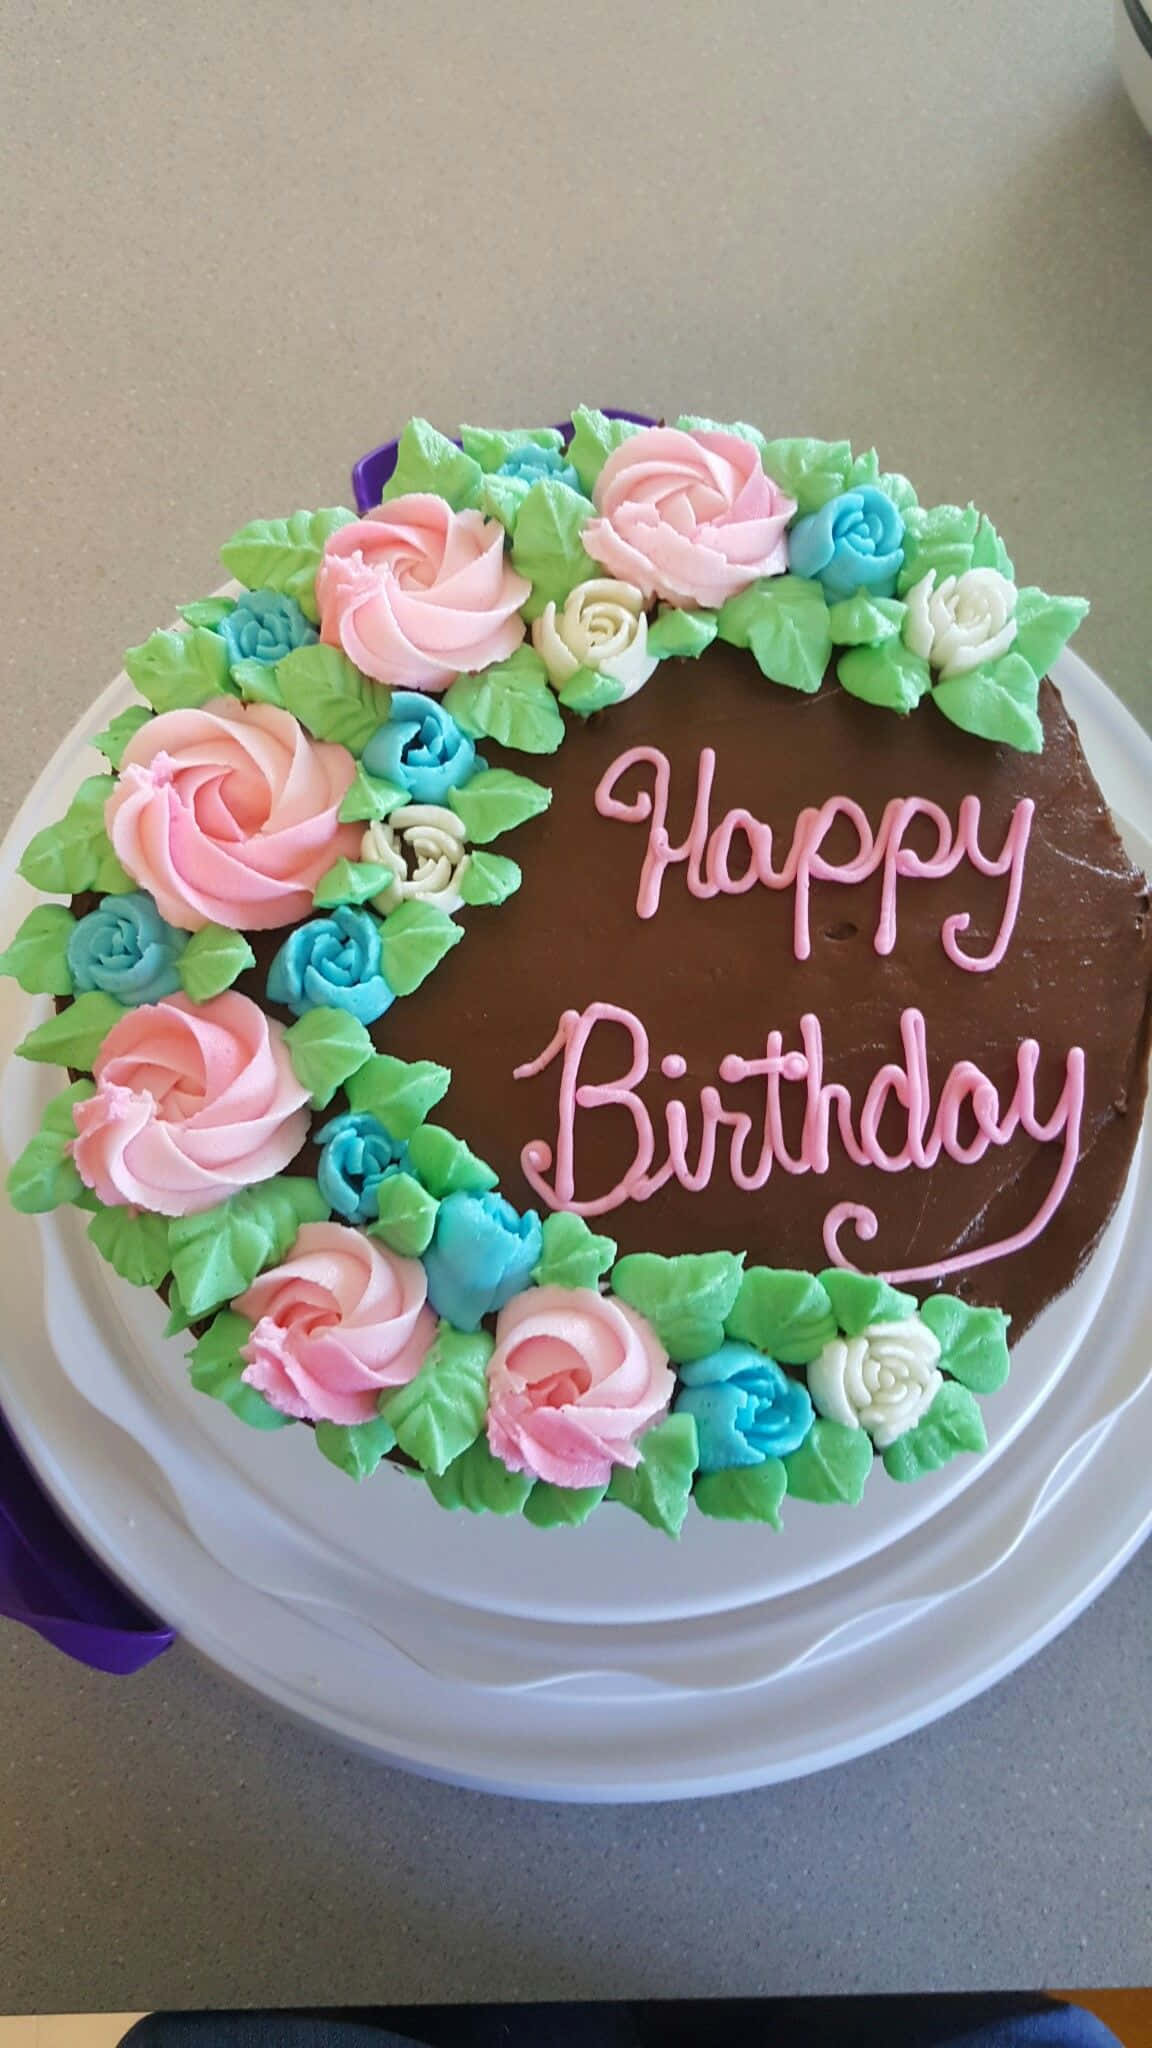 Delicious and colorful Happy Birthday Cake